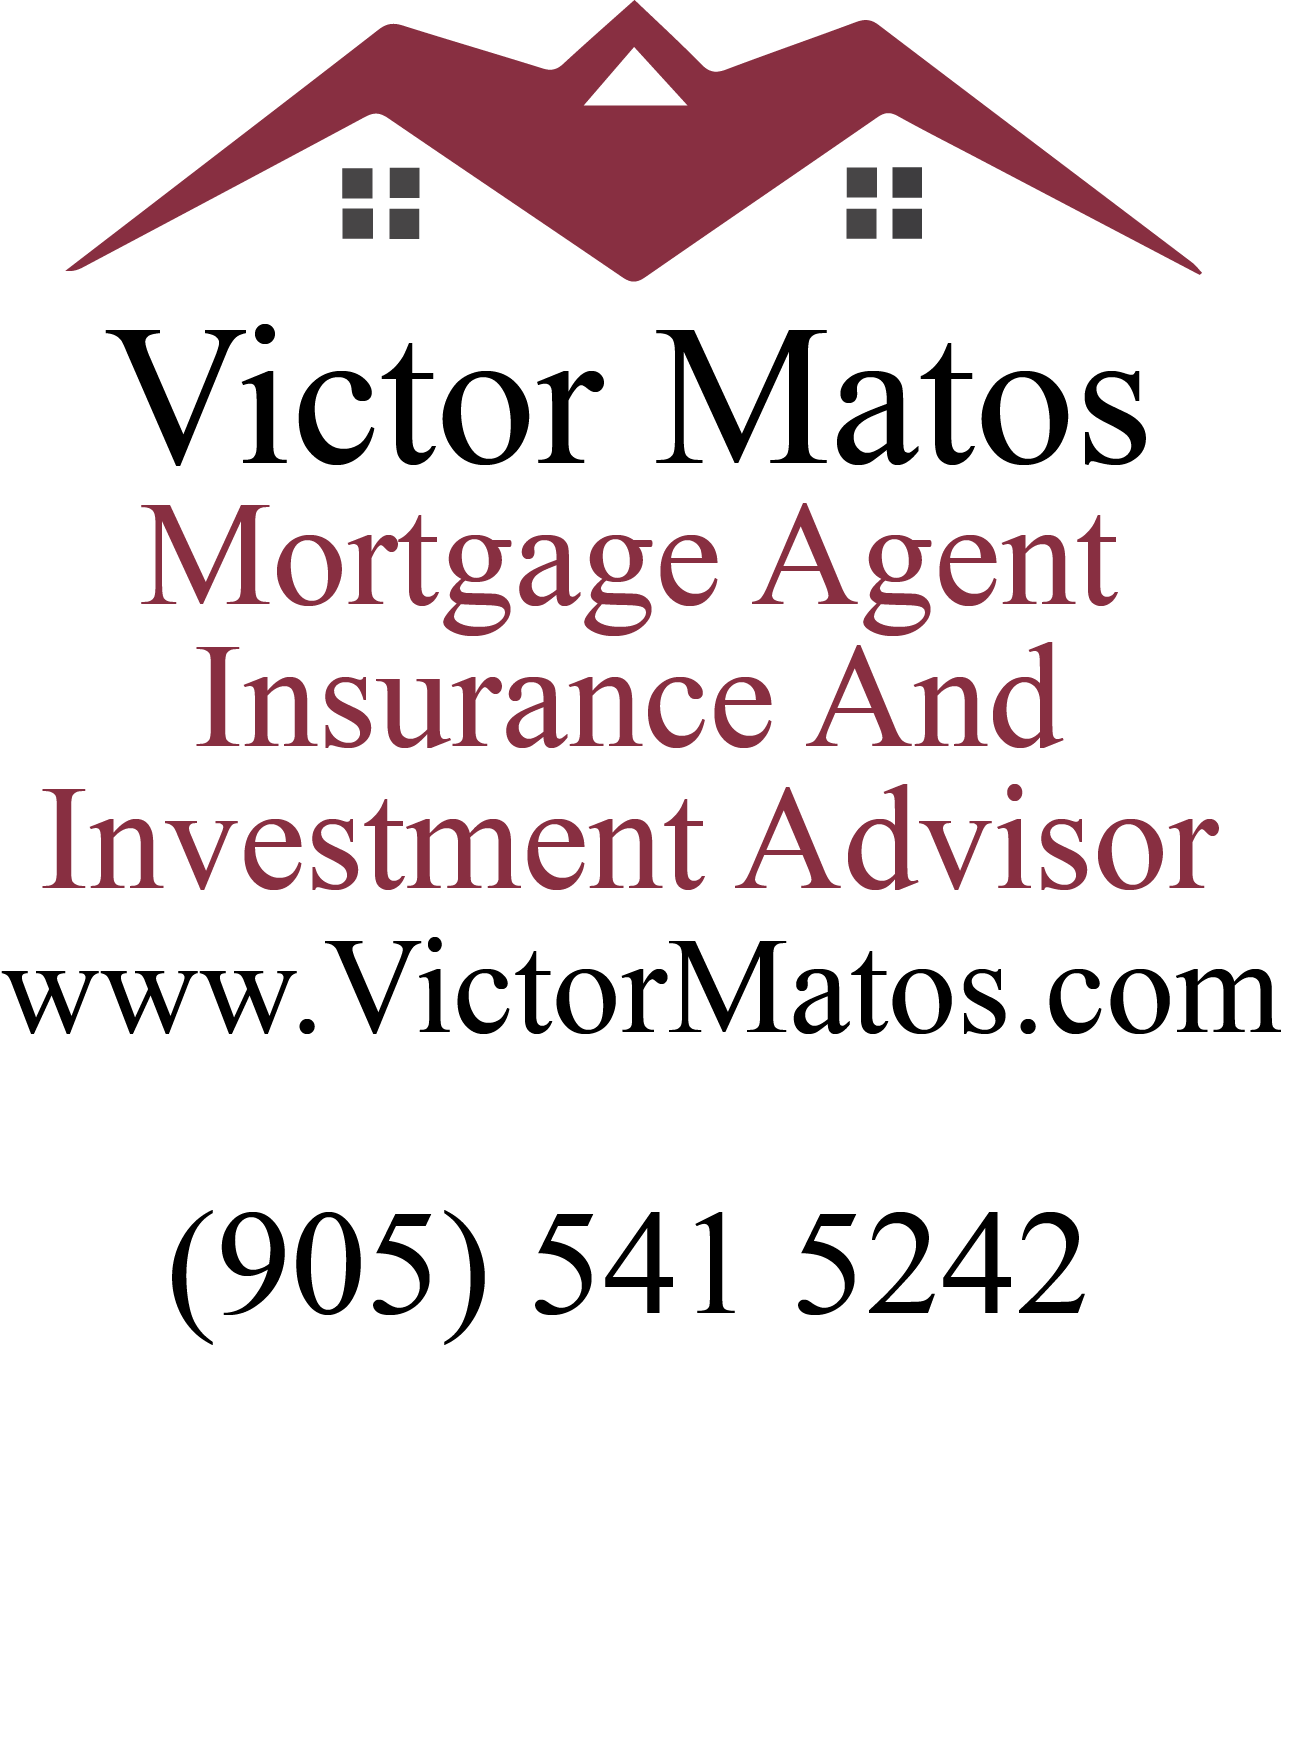 Logo for Victor Matos Financial Services - Mortgage Agent, Insurance and Investments Advisor